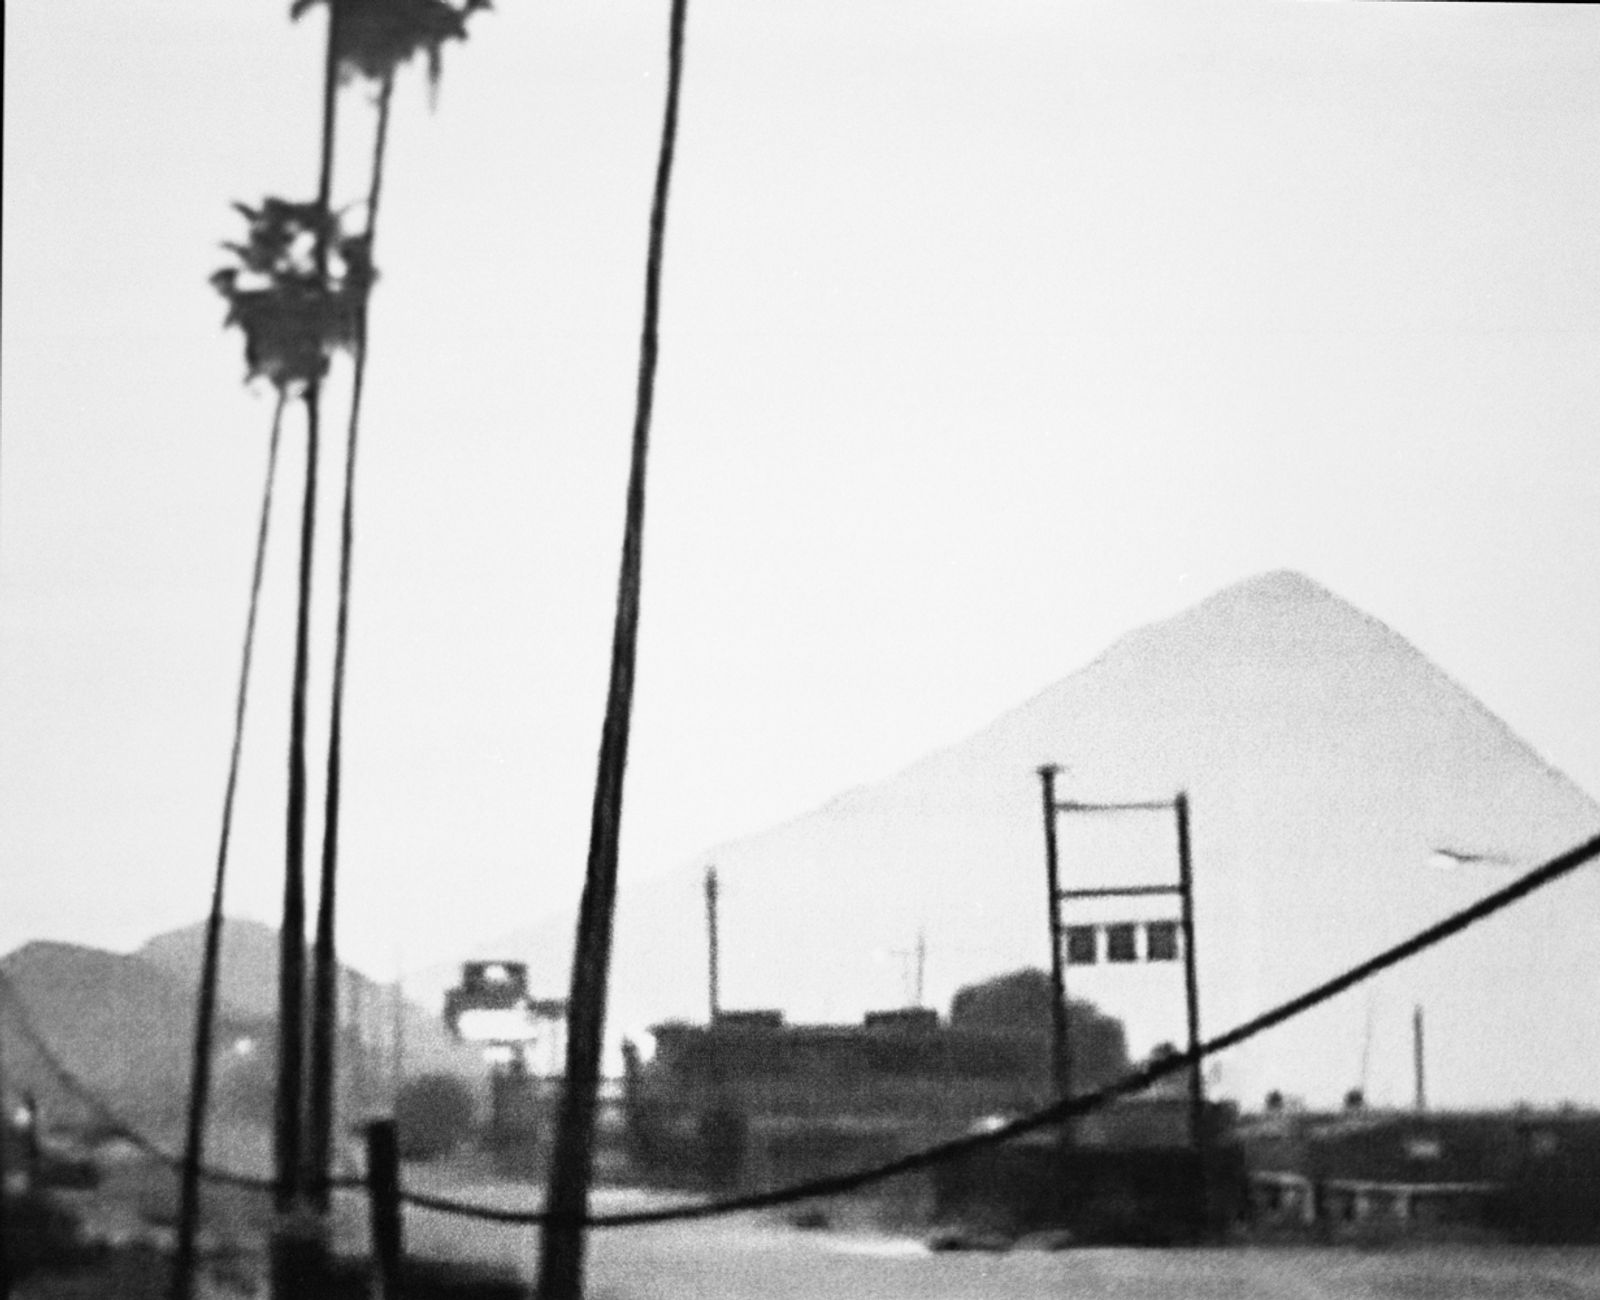 © Eleonora Paciullo - Image from the This is L.A. photography project